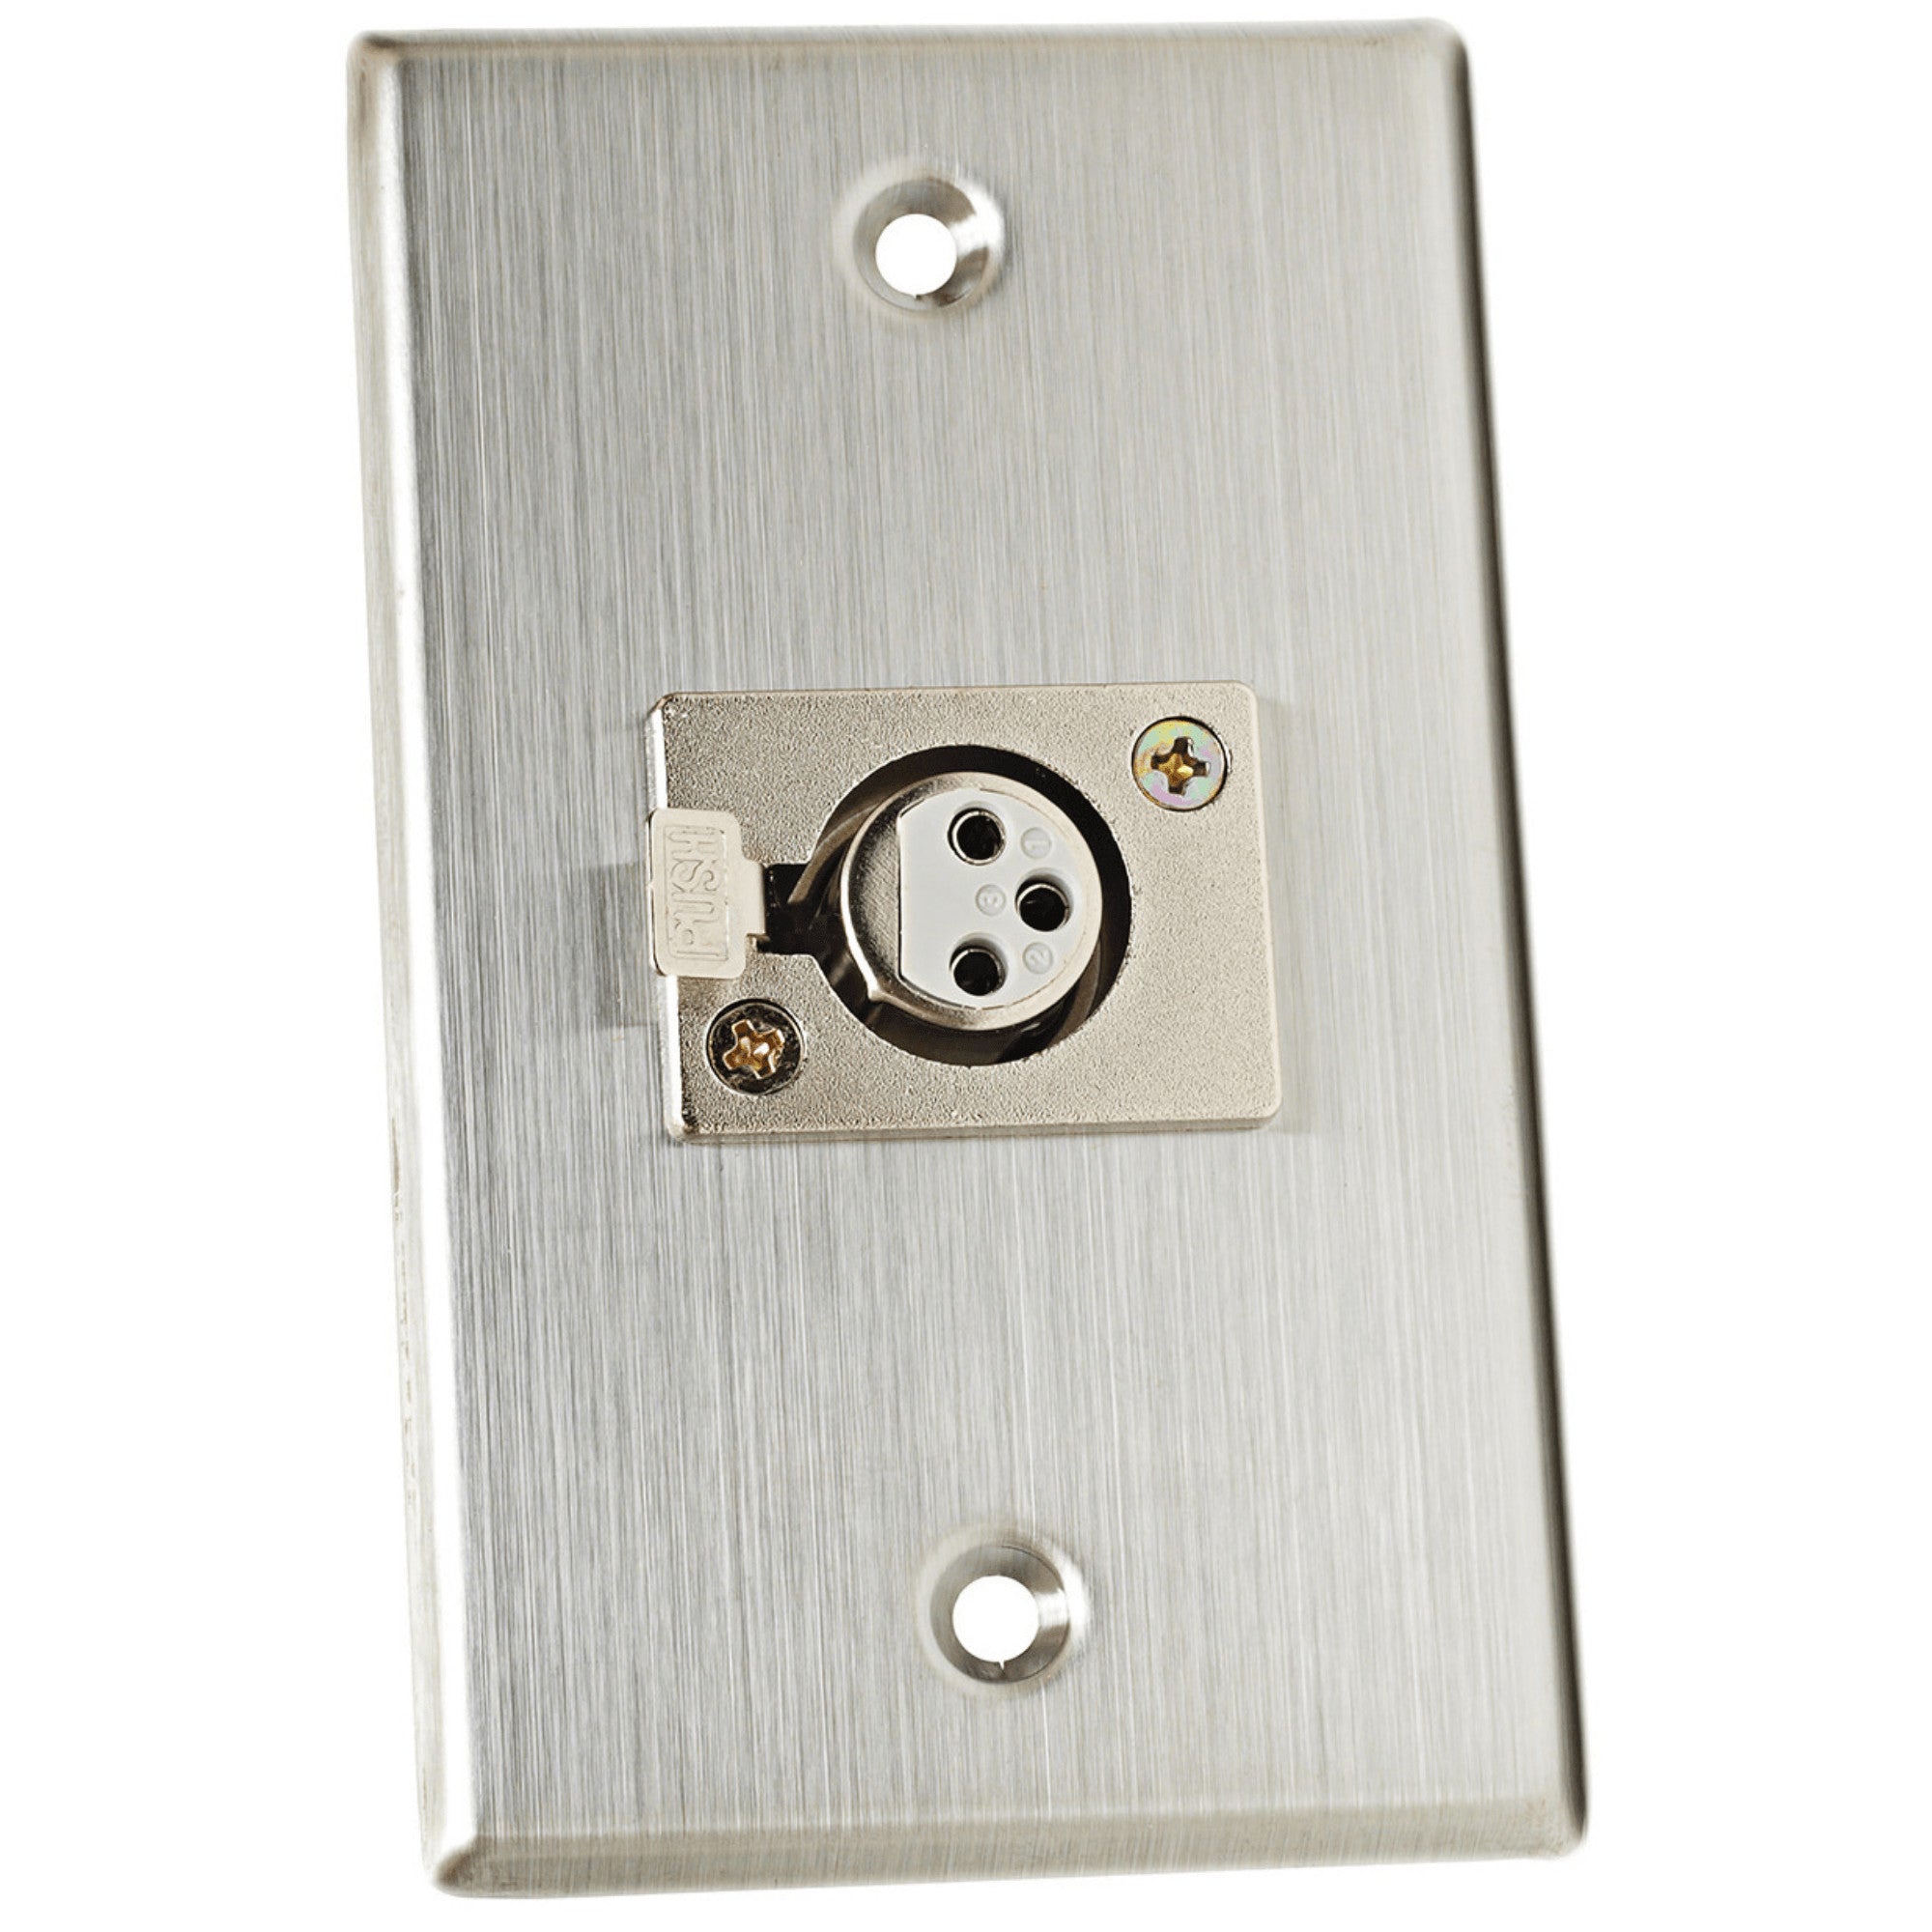 Astatic, Astatic 40-347 Single Gang Stainless Steel Wall Plate with XLR-F